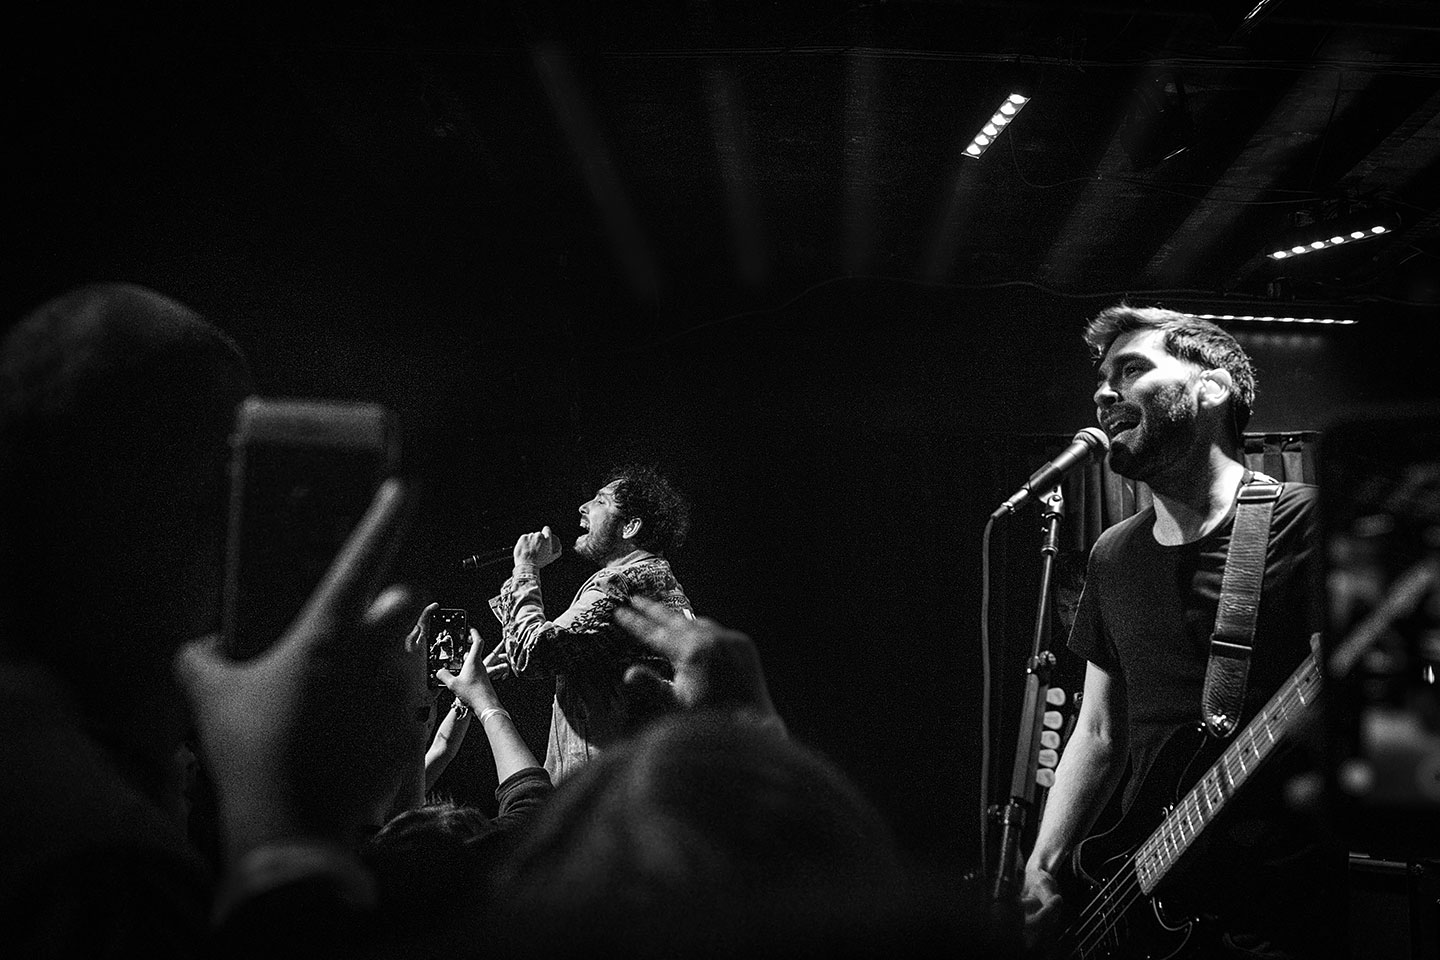 You Me At Six and Dreamers at Marquis Theater - Denver Concert Photos